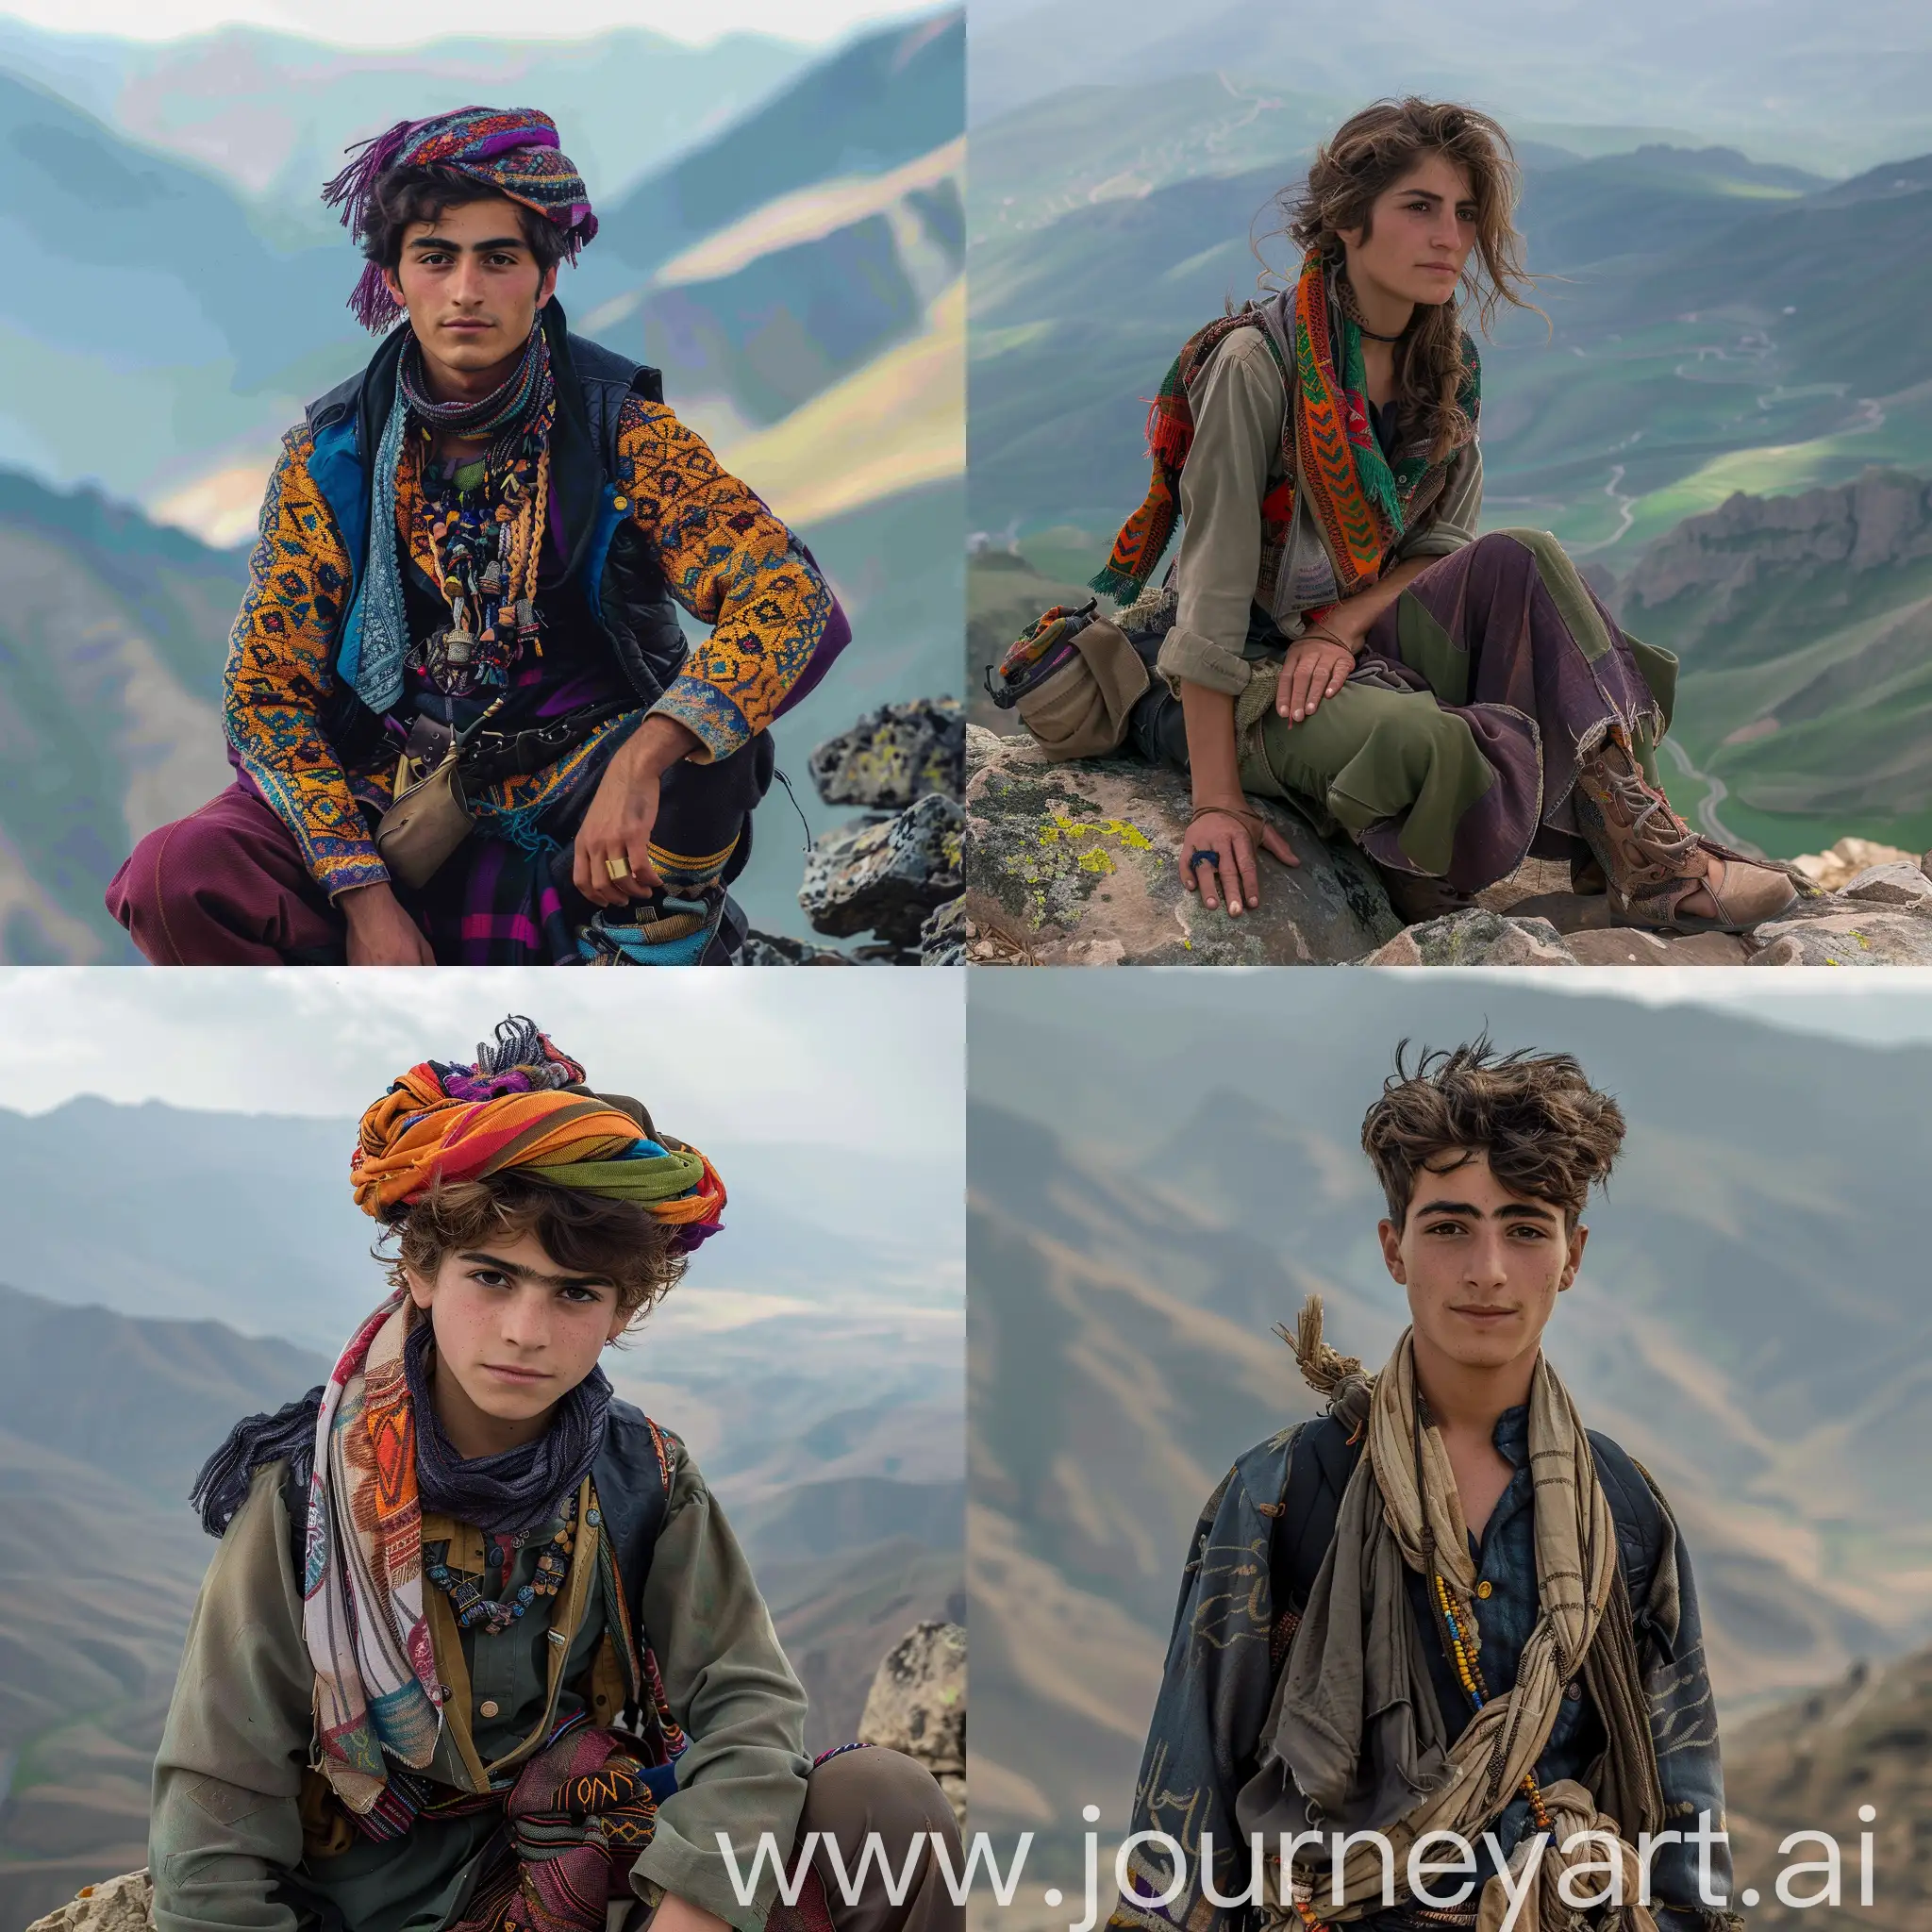 kurdish young buy with kurdish clothes staying on the mountain, realistic